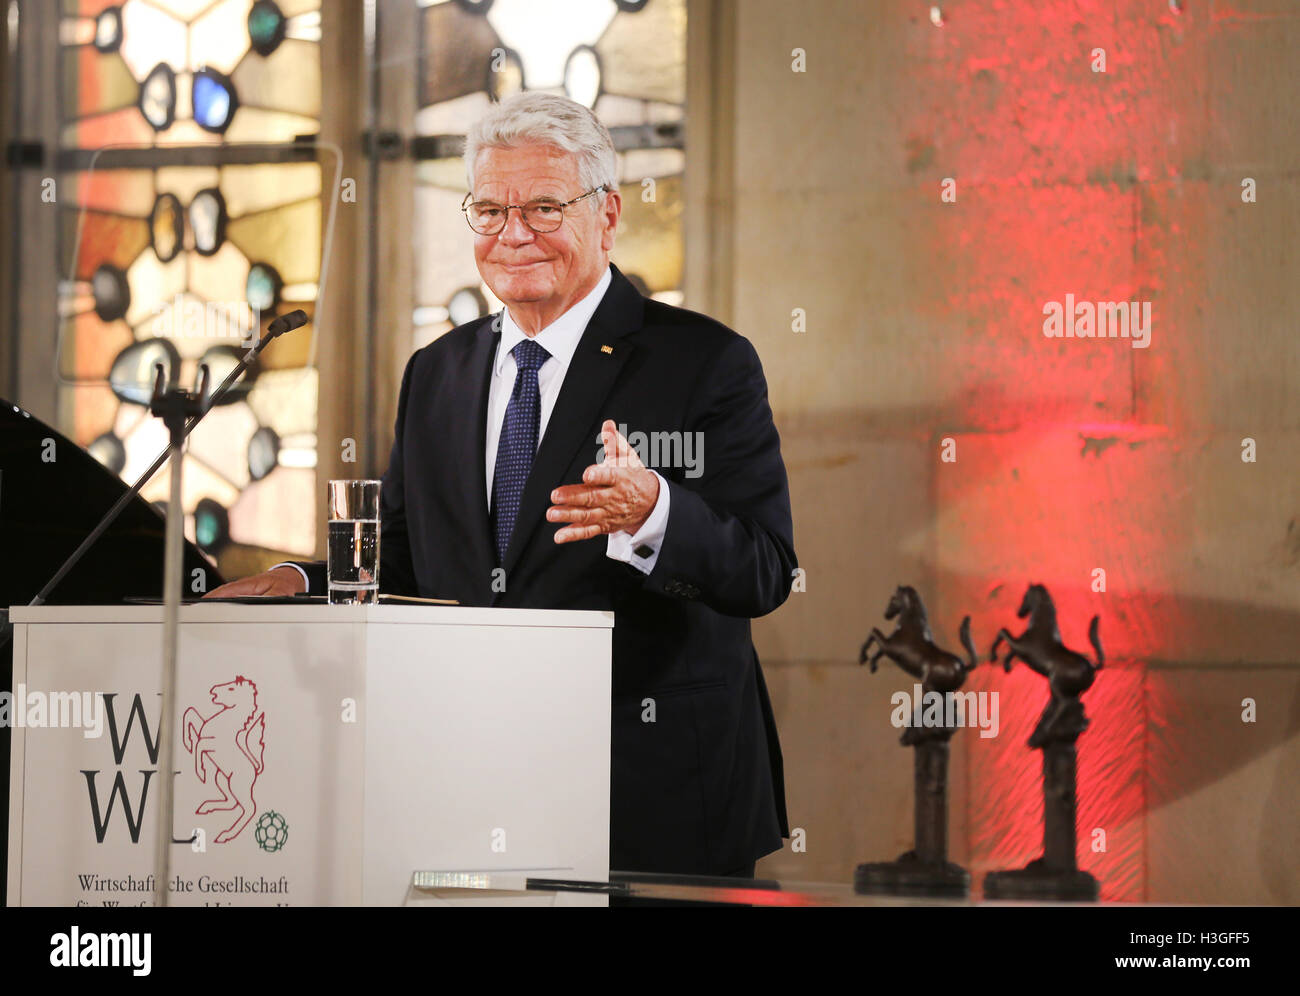 German President Joachim Gauck gives a laudatory speech for King Abdullah II of Jordan at the award ceremony of the Westfaelischer Friedenspreises (lit. Westphalian Peace Prize) in Muenster, Germany, 8 October 2106. He received the award for his mediating role in the Middle East. PHOTO: INA FASSBENDER/DPA Stock Photo